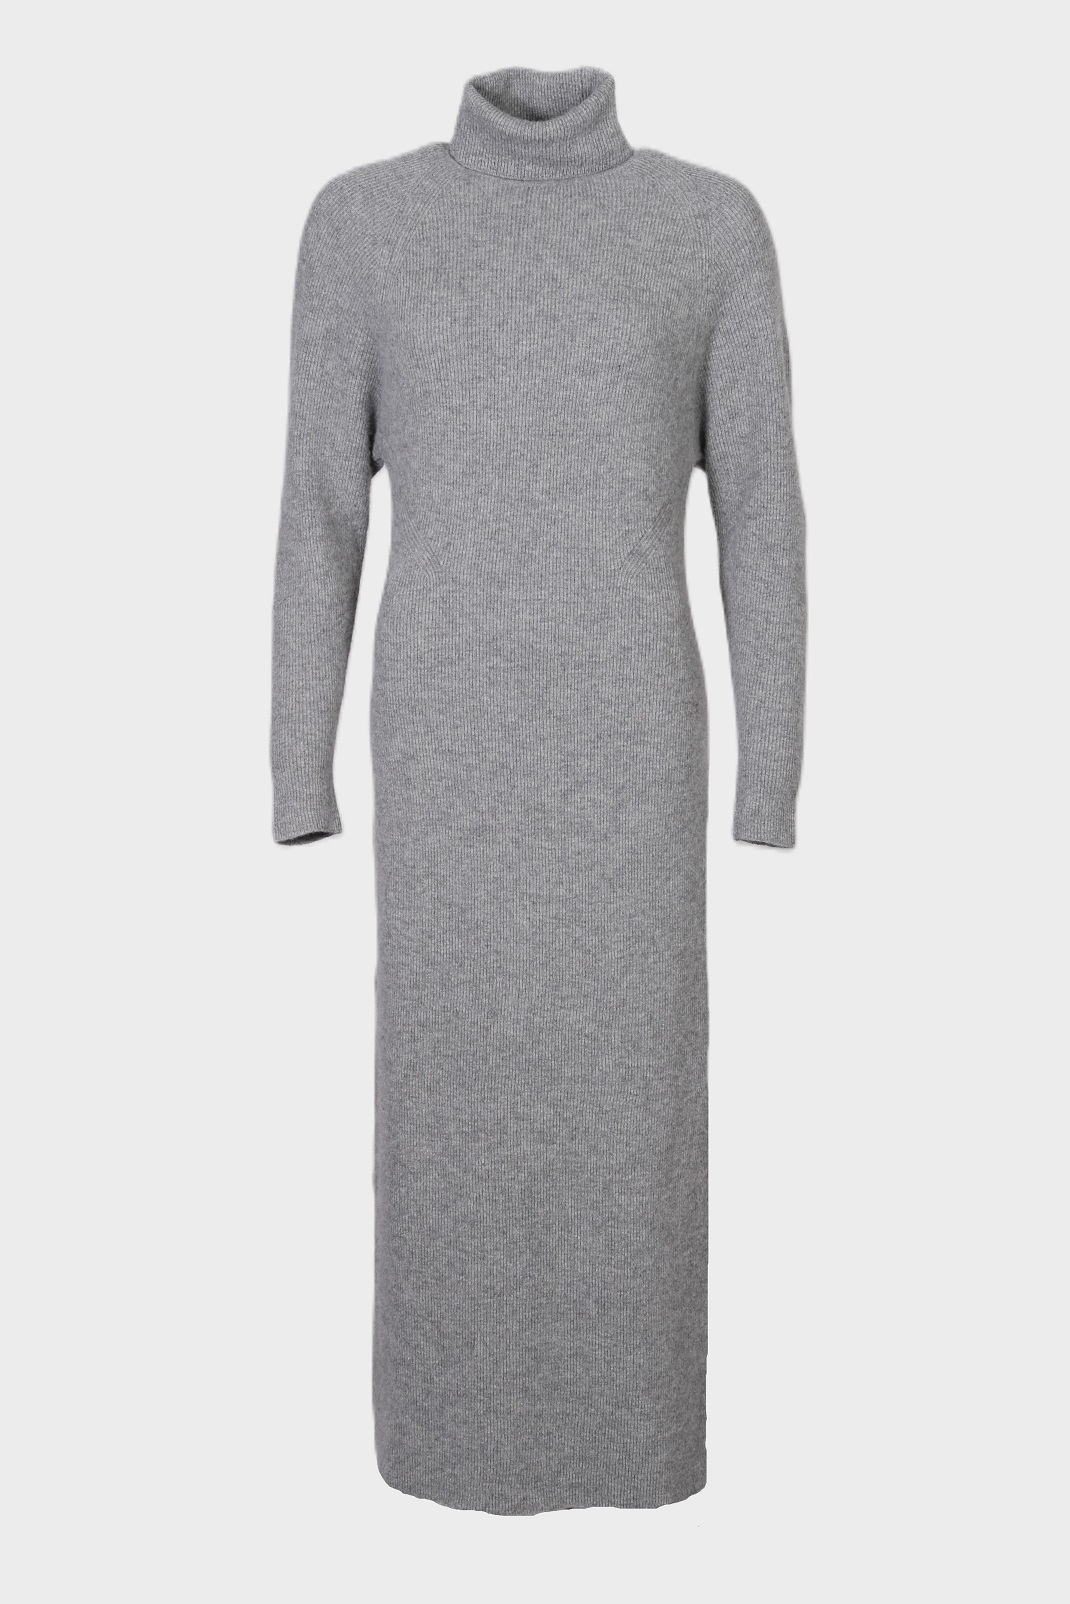 GOLDEN GOOSE Knit Dress Ribbed Wool in Grey